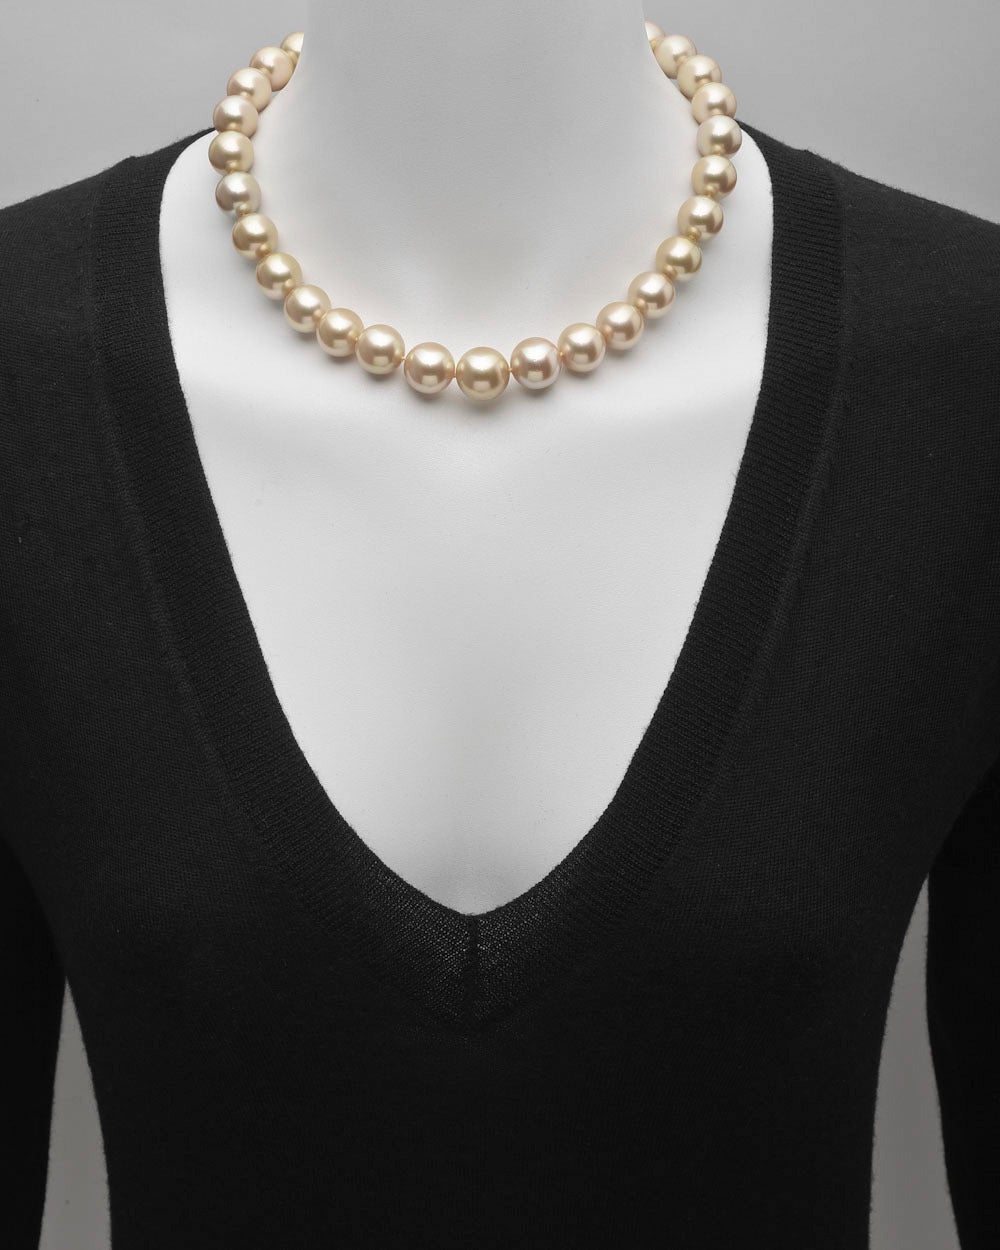 Golden South Sea pearl necklace, composed of 31 naturally golden-colored South Sea pearls ranging from 13 to 15mm in diameter, strung on a hand-knotted silk cord, with an 18k yellow gold screw-in ball clasp pavé-set with round diamonds, the diamonds